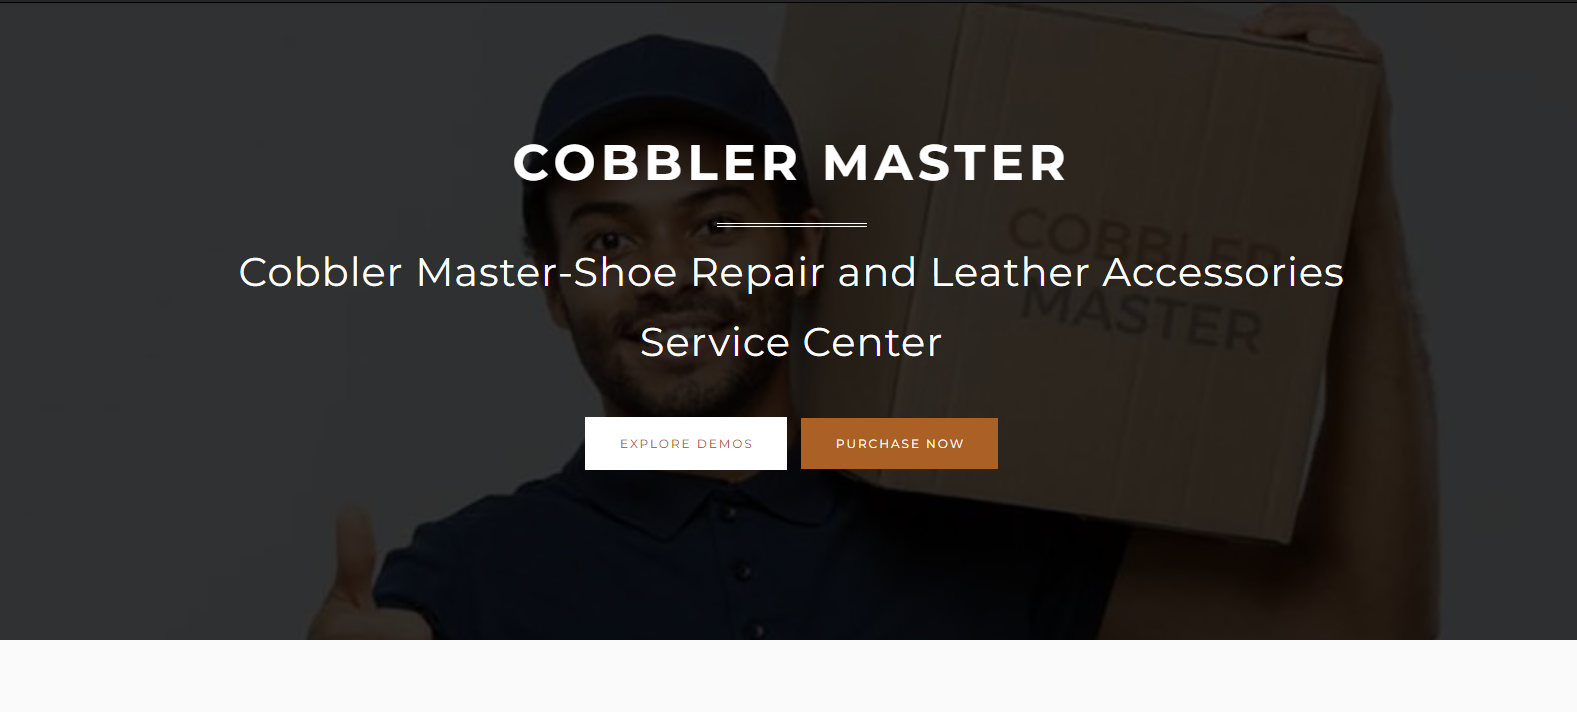 Cobbler Master - Shoe Repair and Leather Accessories Service Center